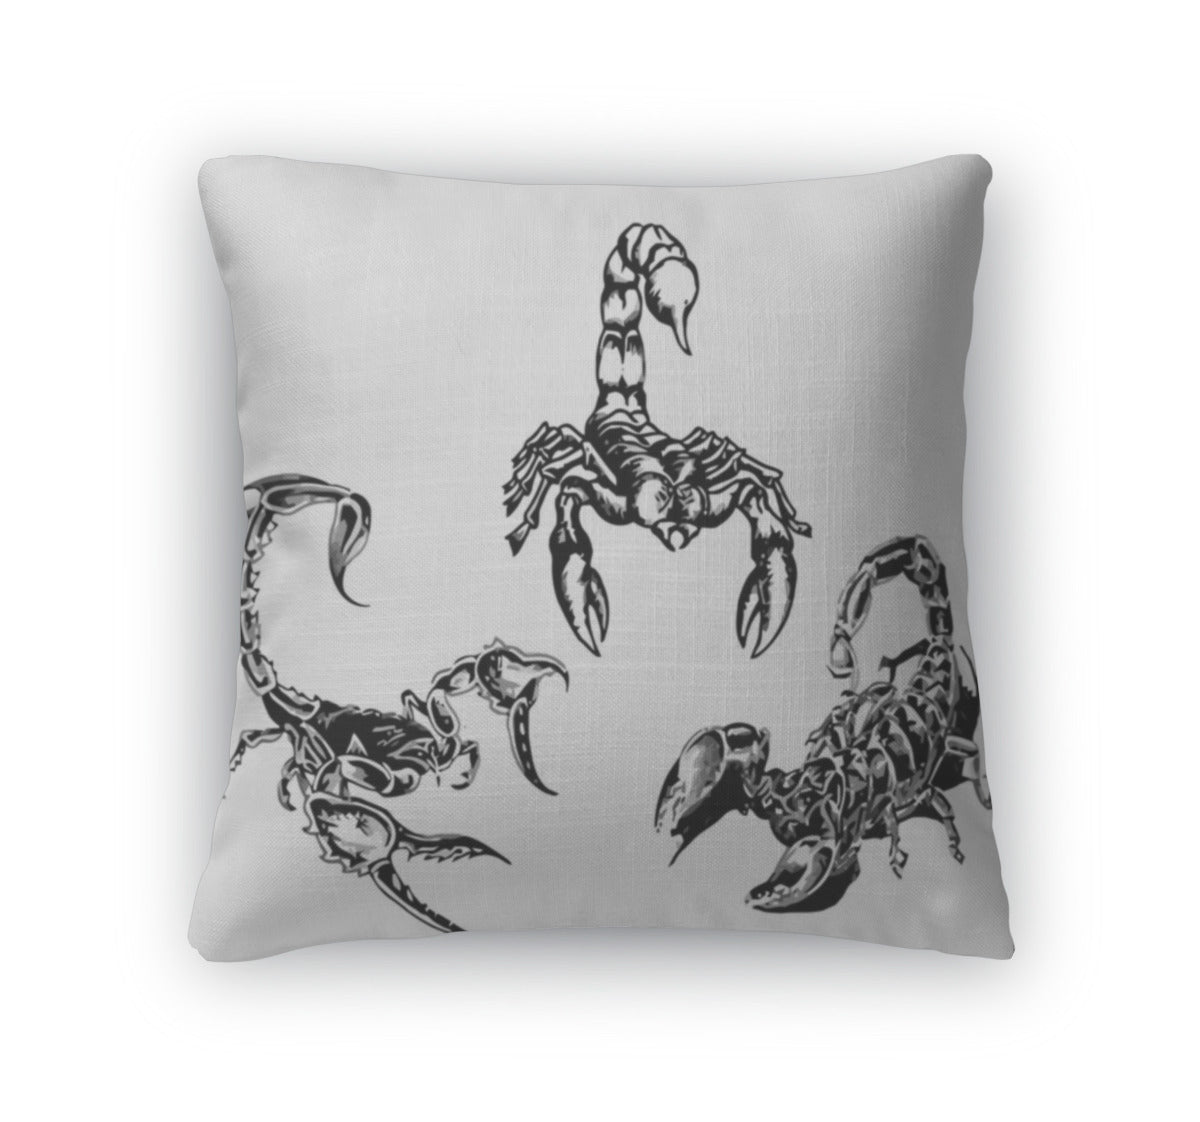 Throw Pillow, Tattoo Of The Scorpions 3